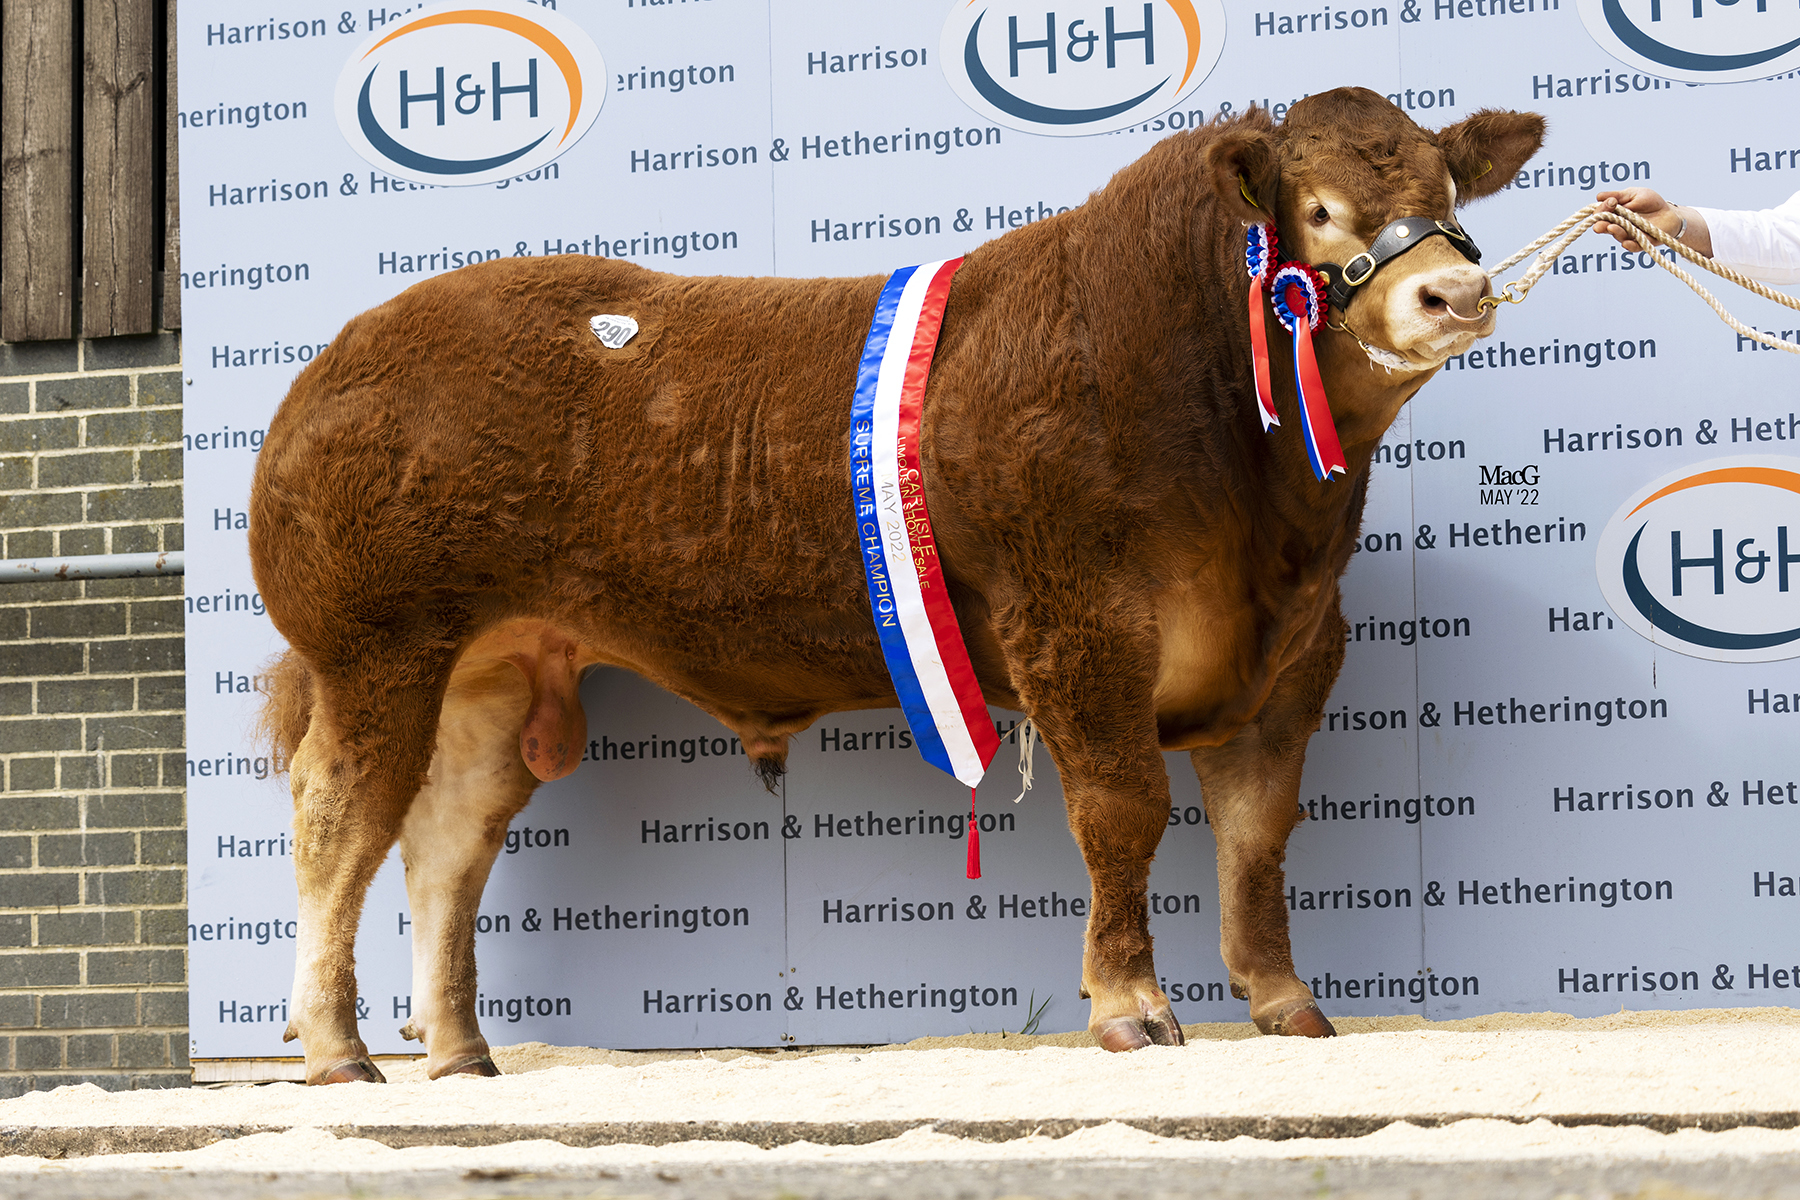 Gerwyn Jones sold Graiggoch Rambo for a world record price of 180,000gns in May